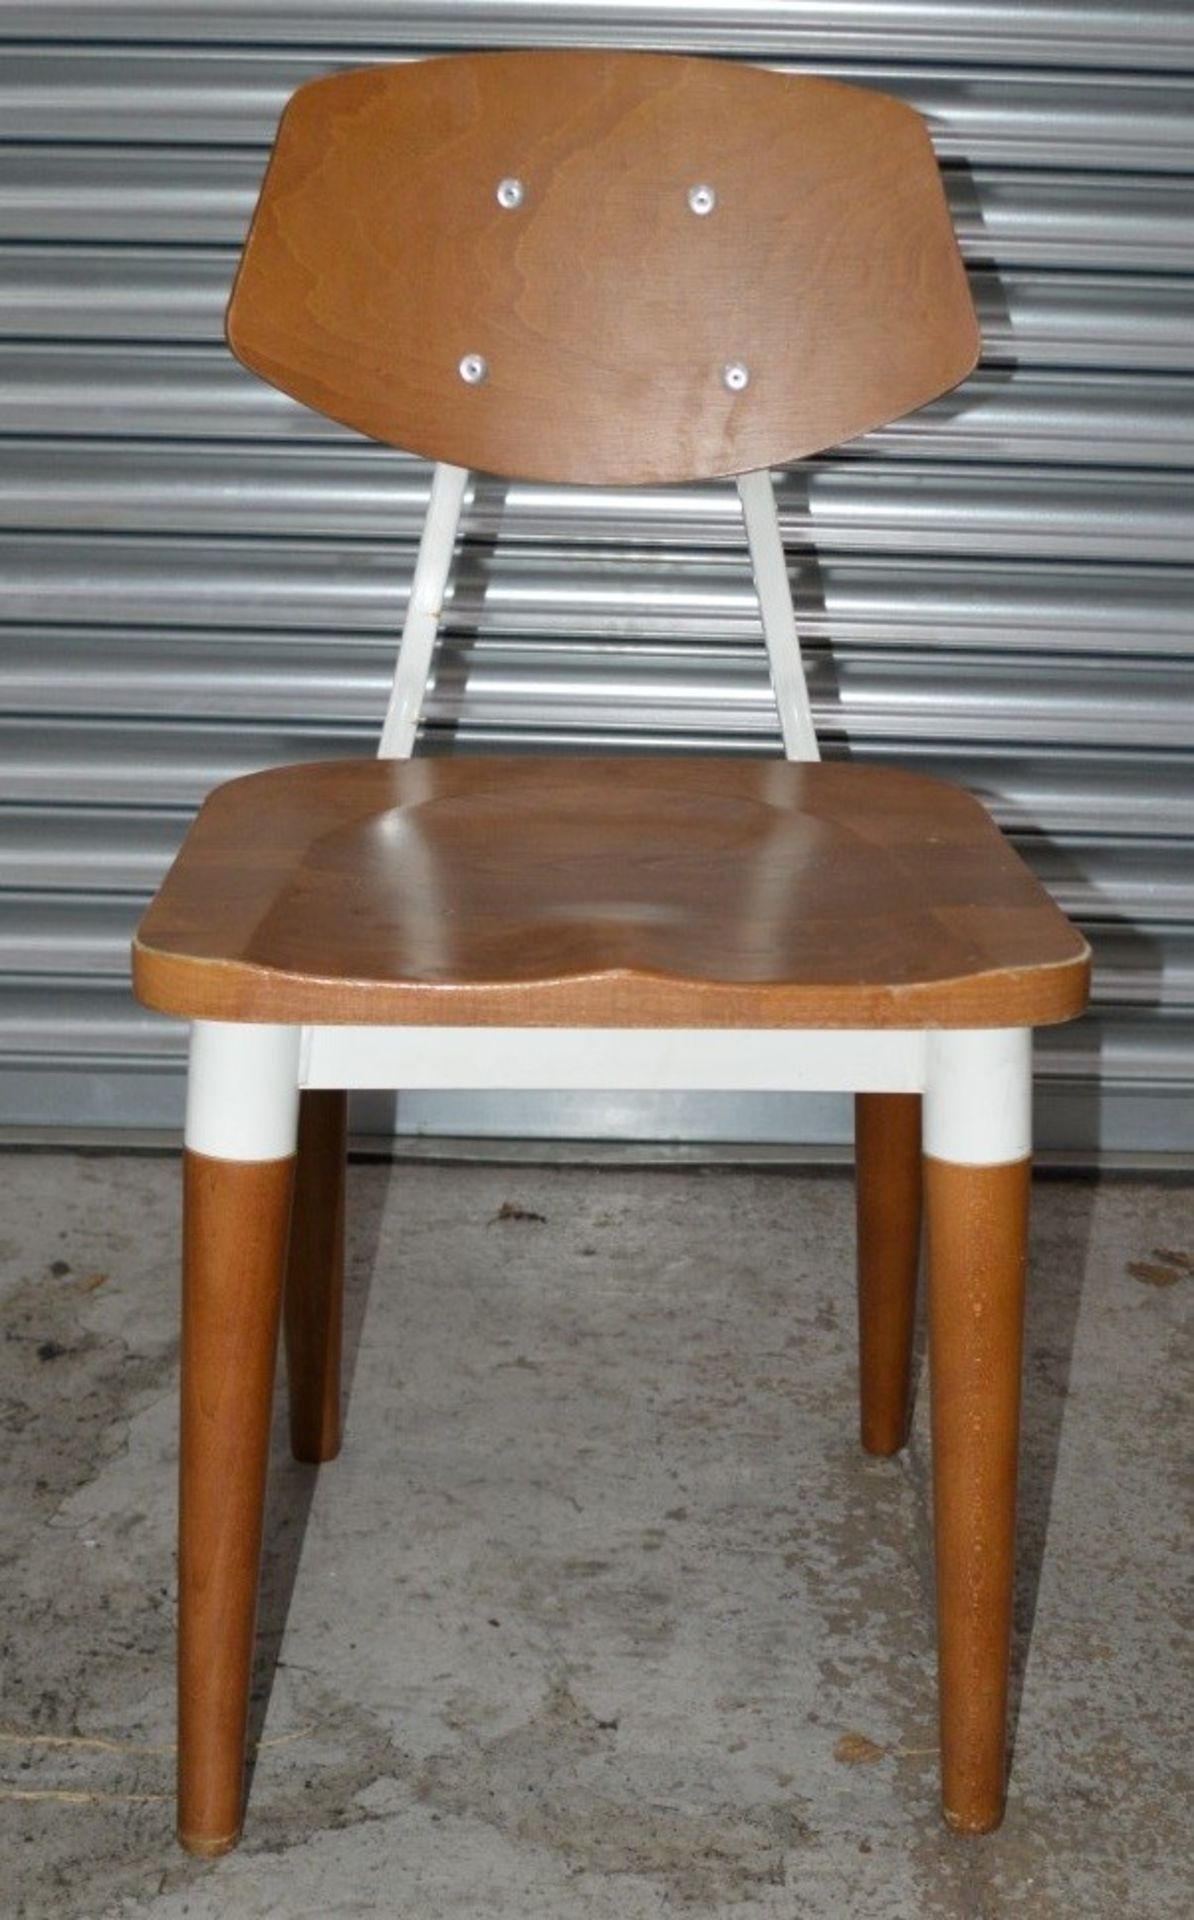 8 x Contemporary Commercial Dining Chairs With A Sturdy Wood And Metal Construction - Image 3 of 10